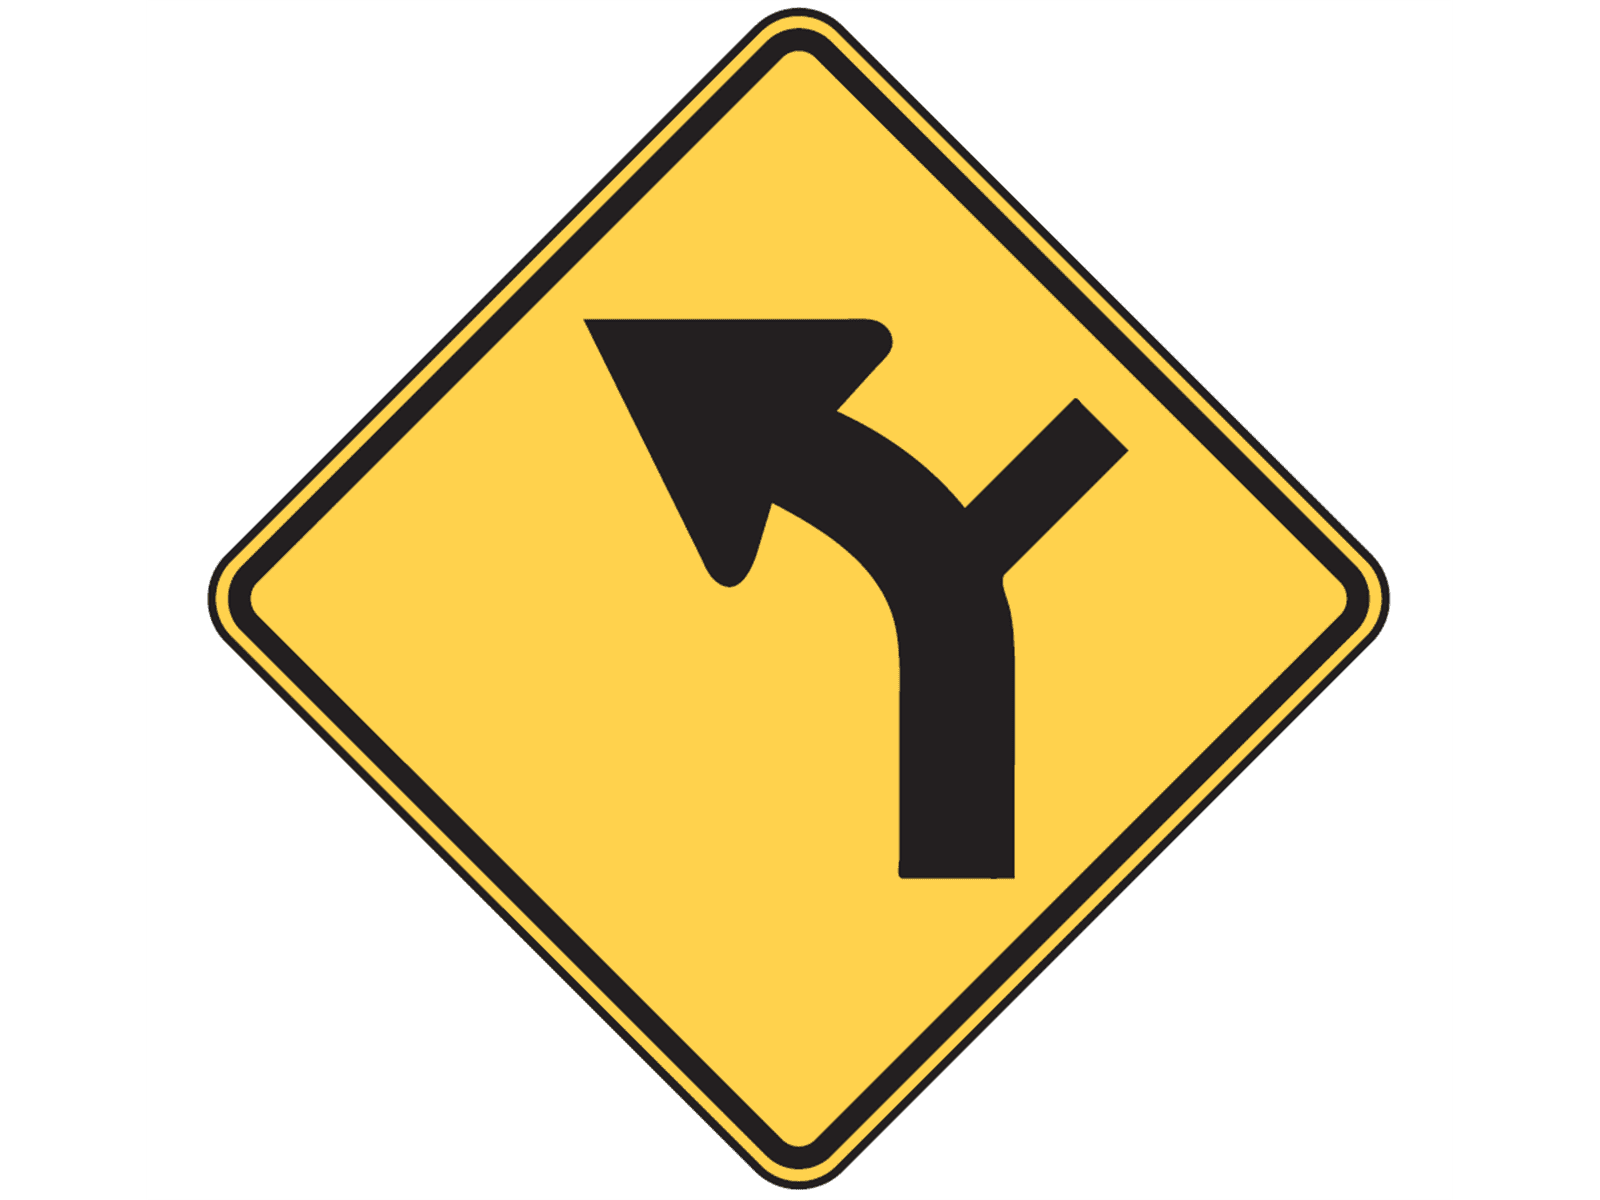 Left Curve and Side Road W1-10L - W1: Curves and Turns